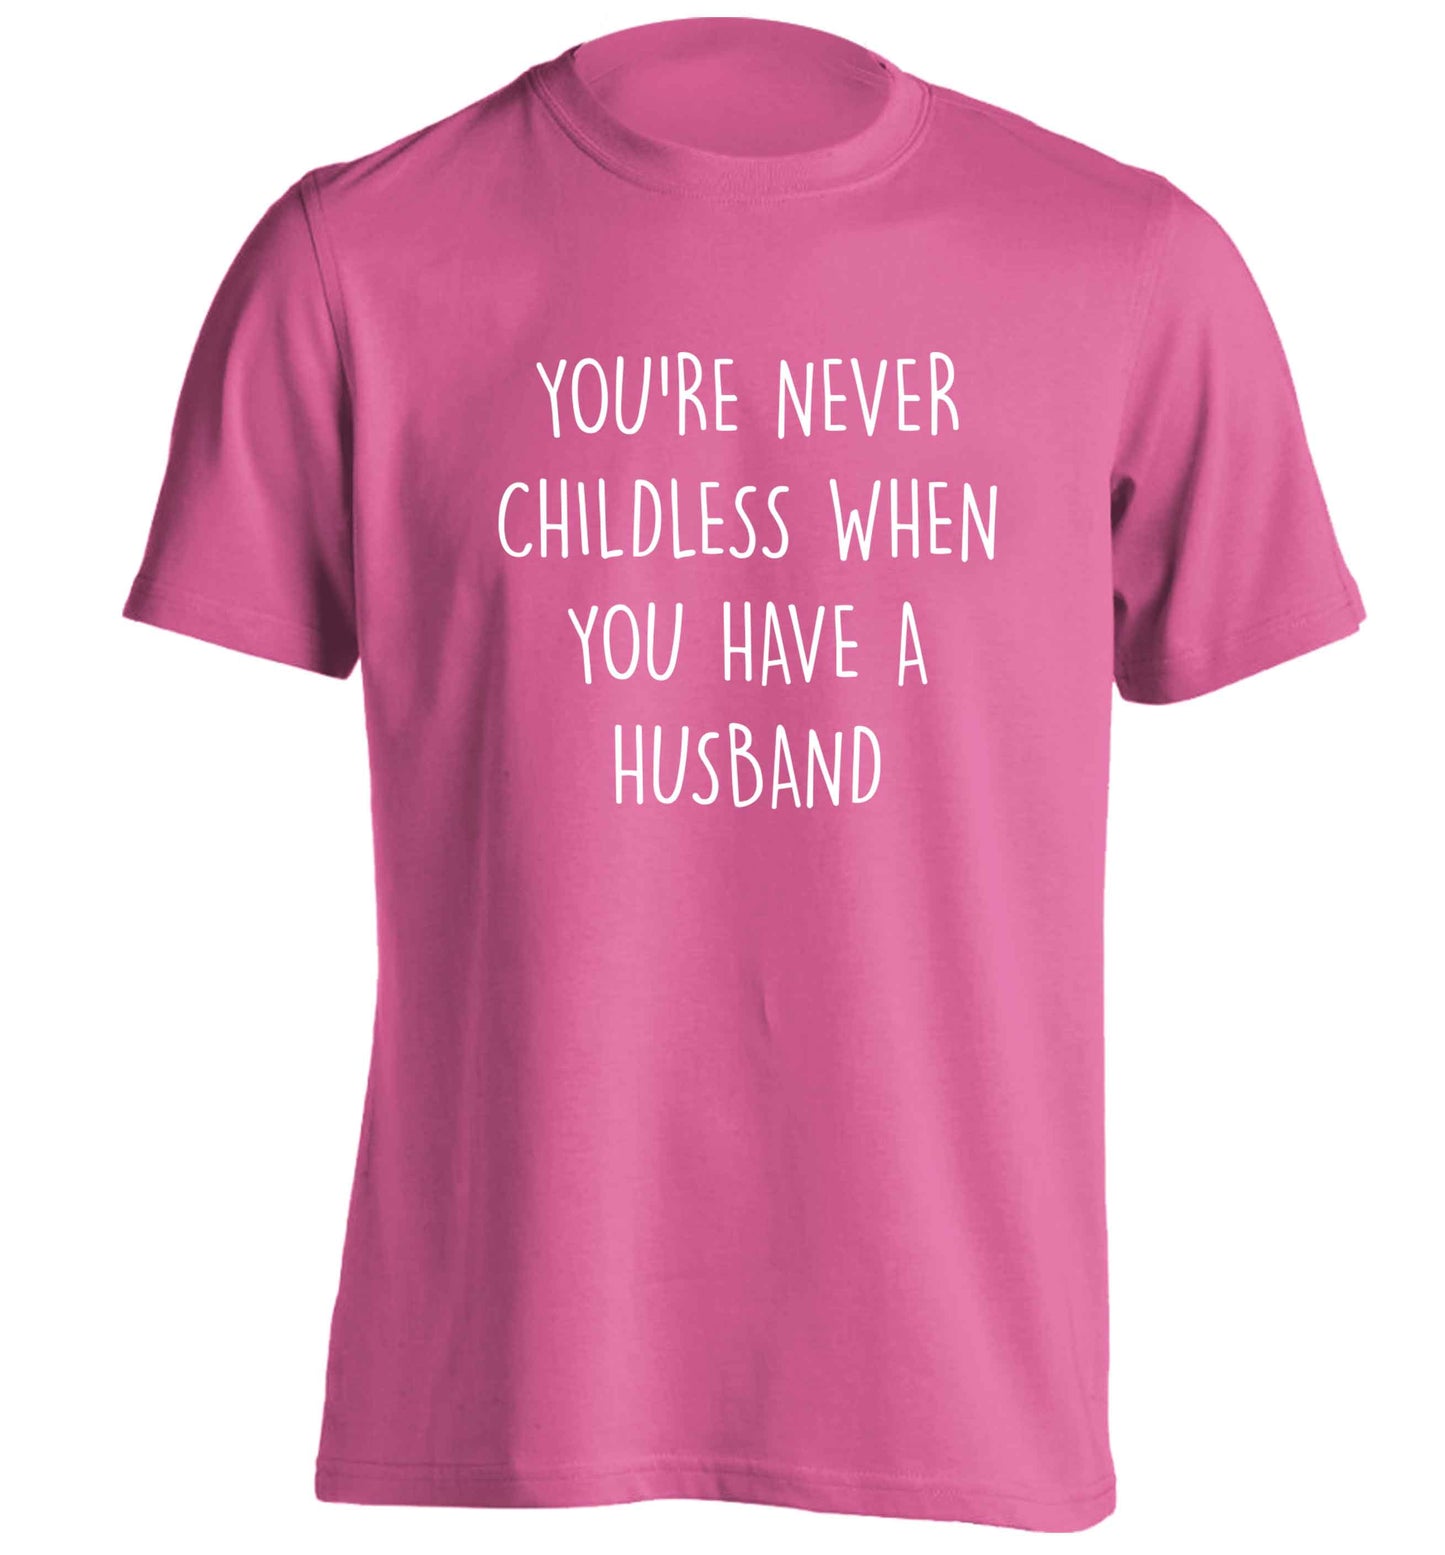 You're never childess when you have a husband adults unisex pink Tshirt 2XL